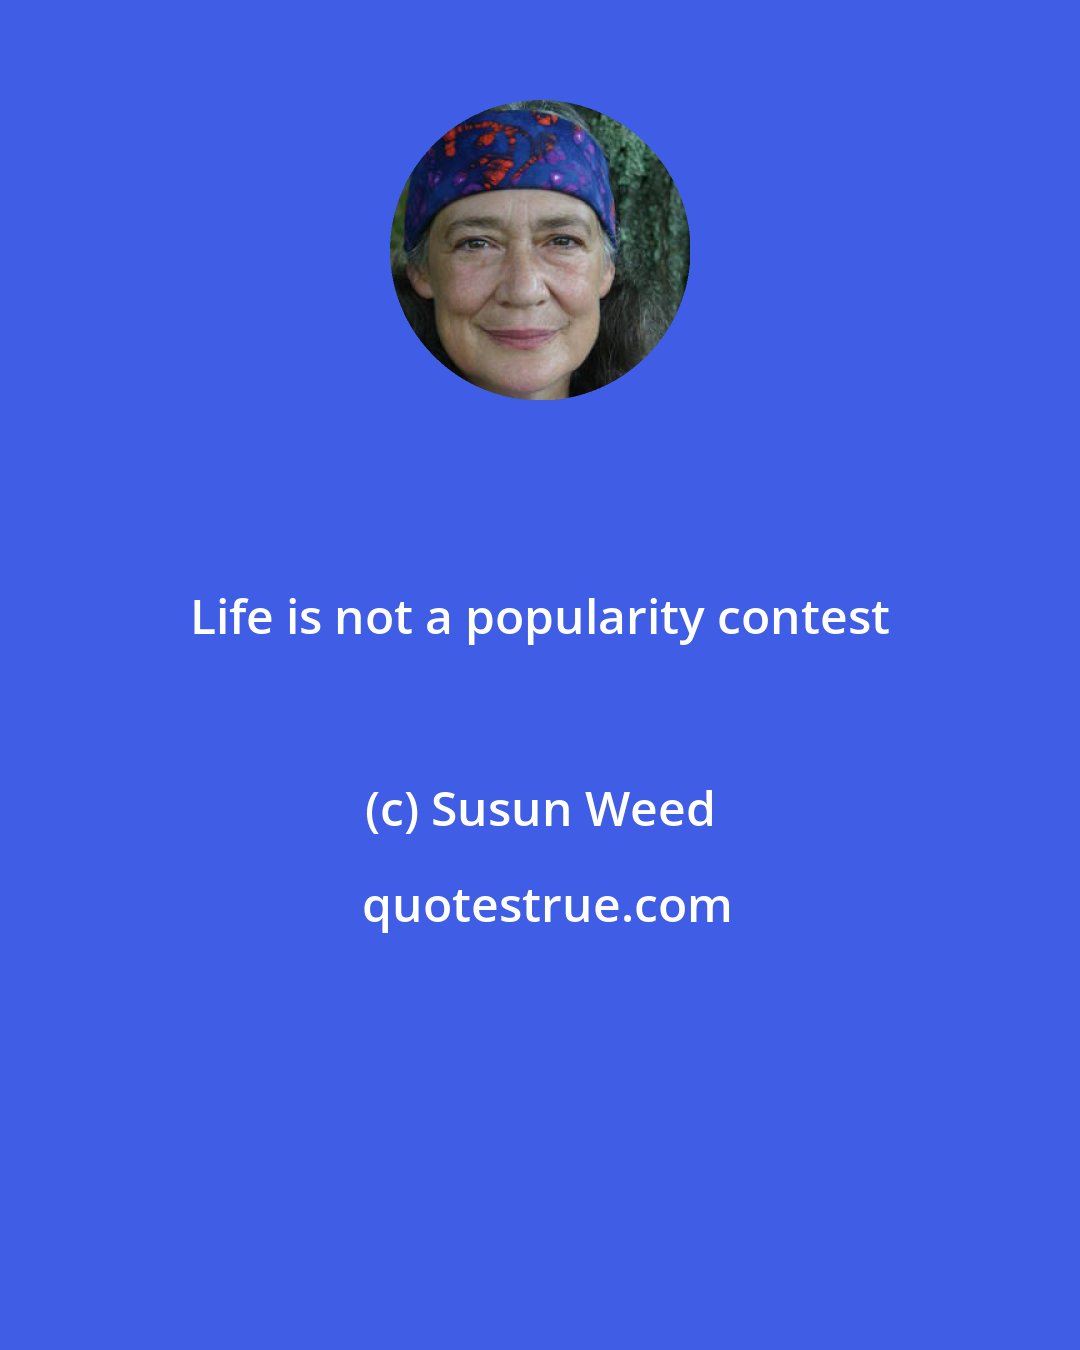 Susun Weed: Life is not a popularity contest